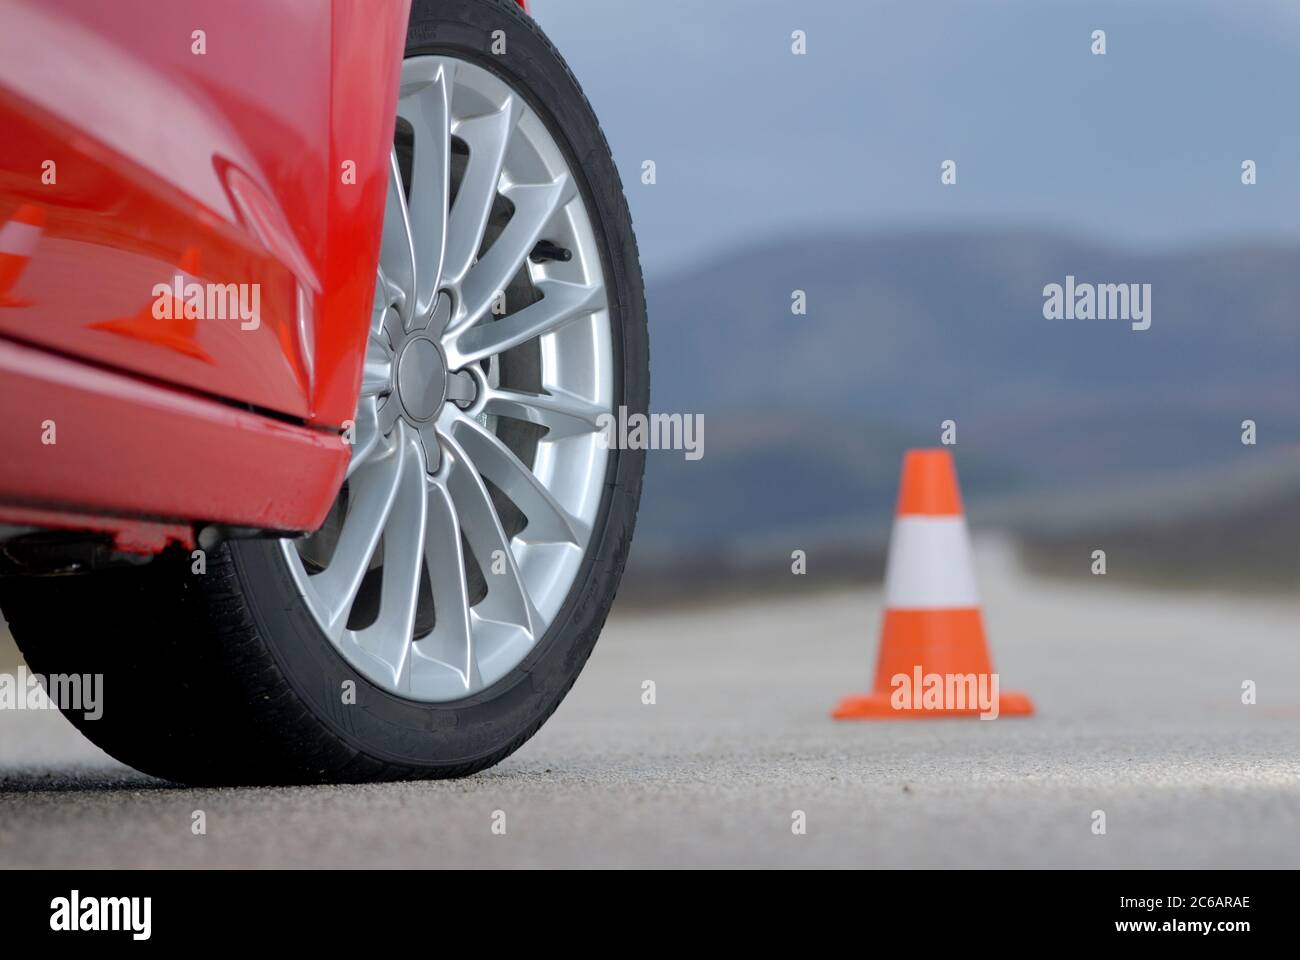 aluminium sport wheel on a red sport car and cone Stock Photo